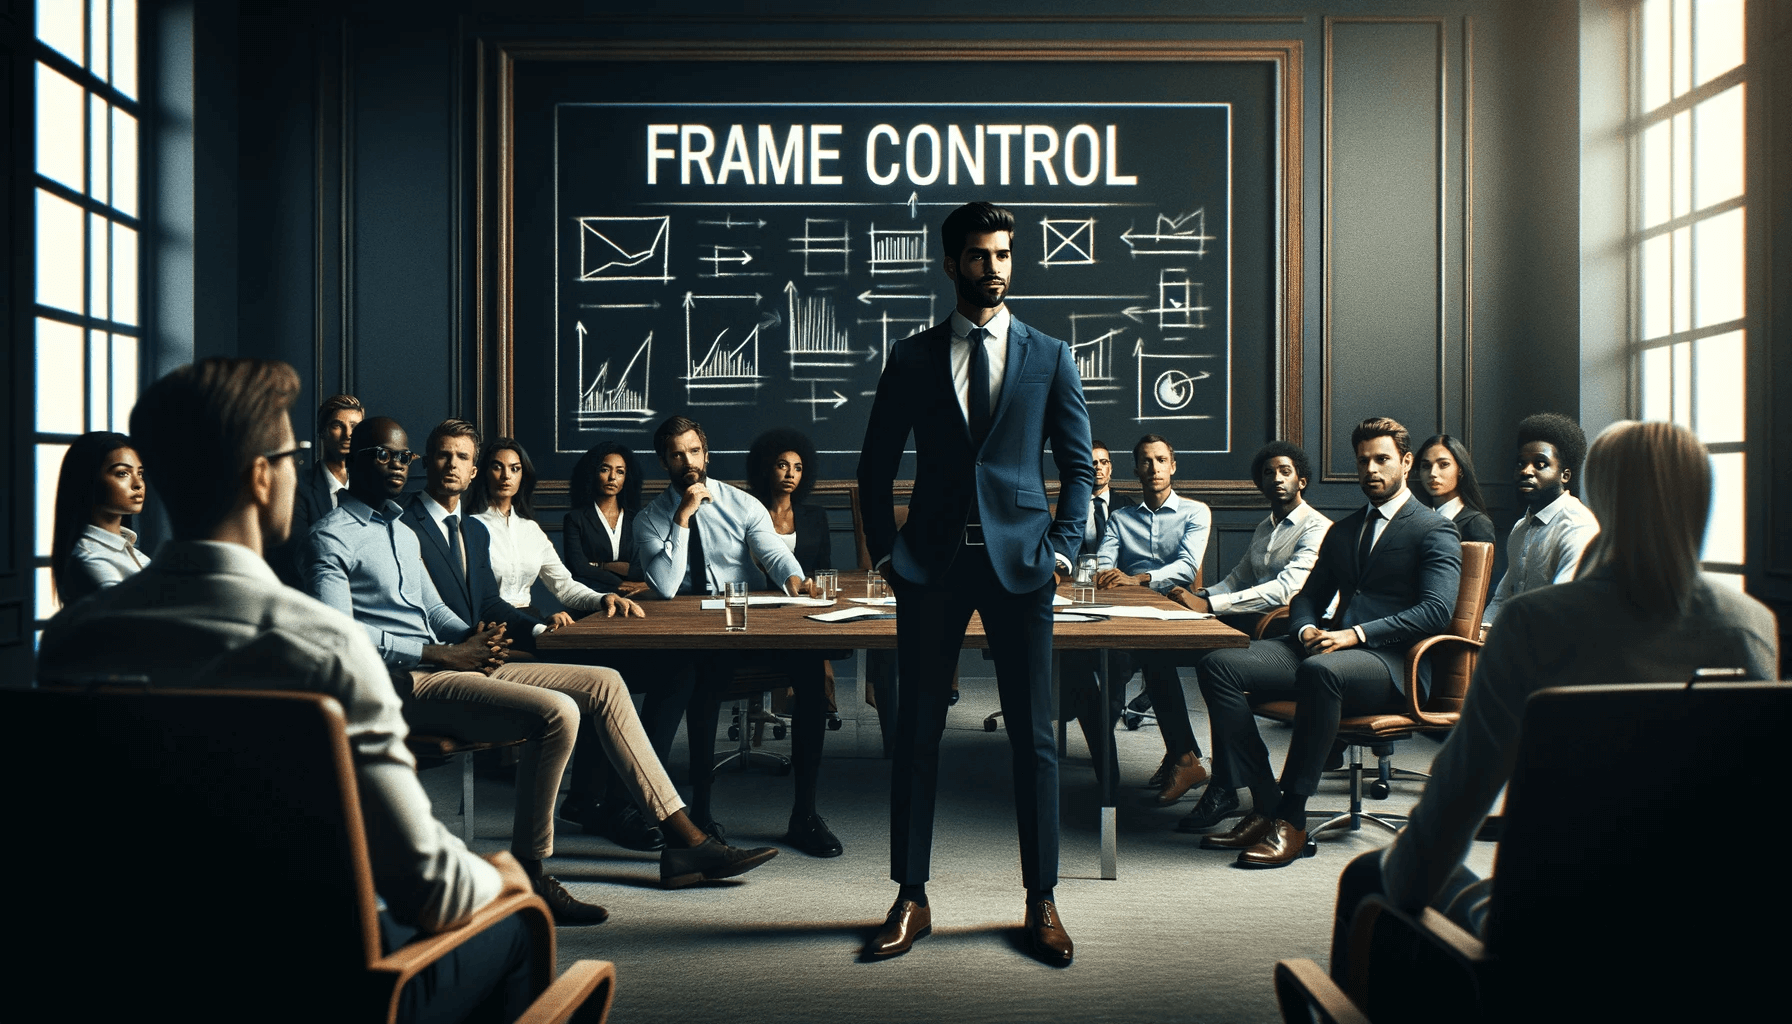 The Art of Frame Control: Techniques to Establish Authority and Influence in any Situation